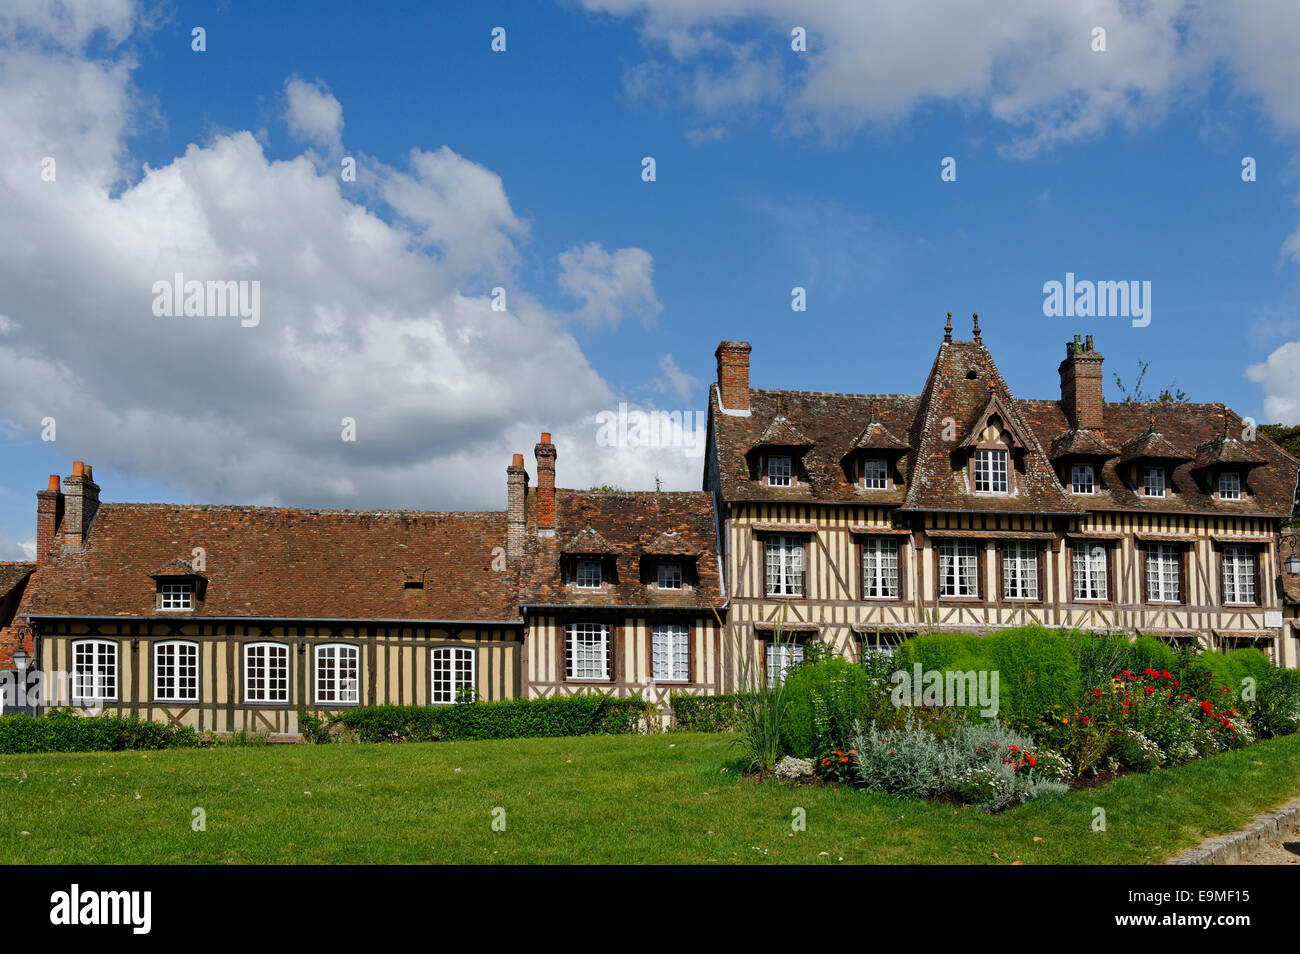 Home of the composer Maurice Ravel, Lyons-la-Forêt, Les Andelys, Department Eure, Upper Normandy, France Stock Photo